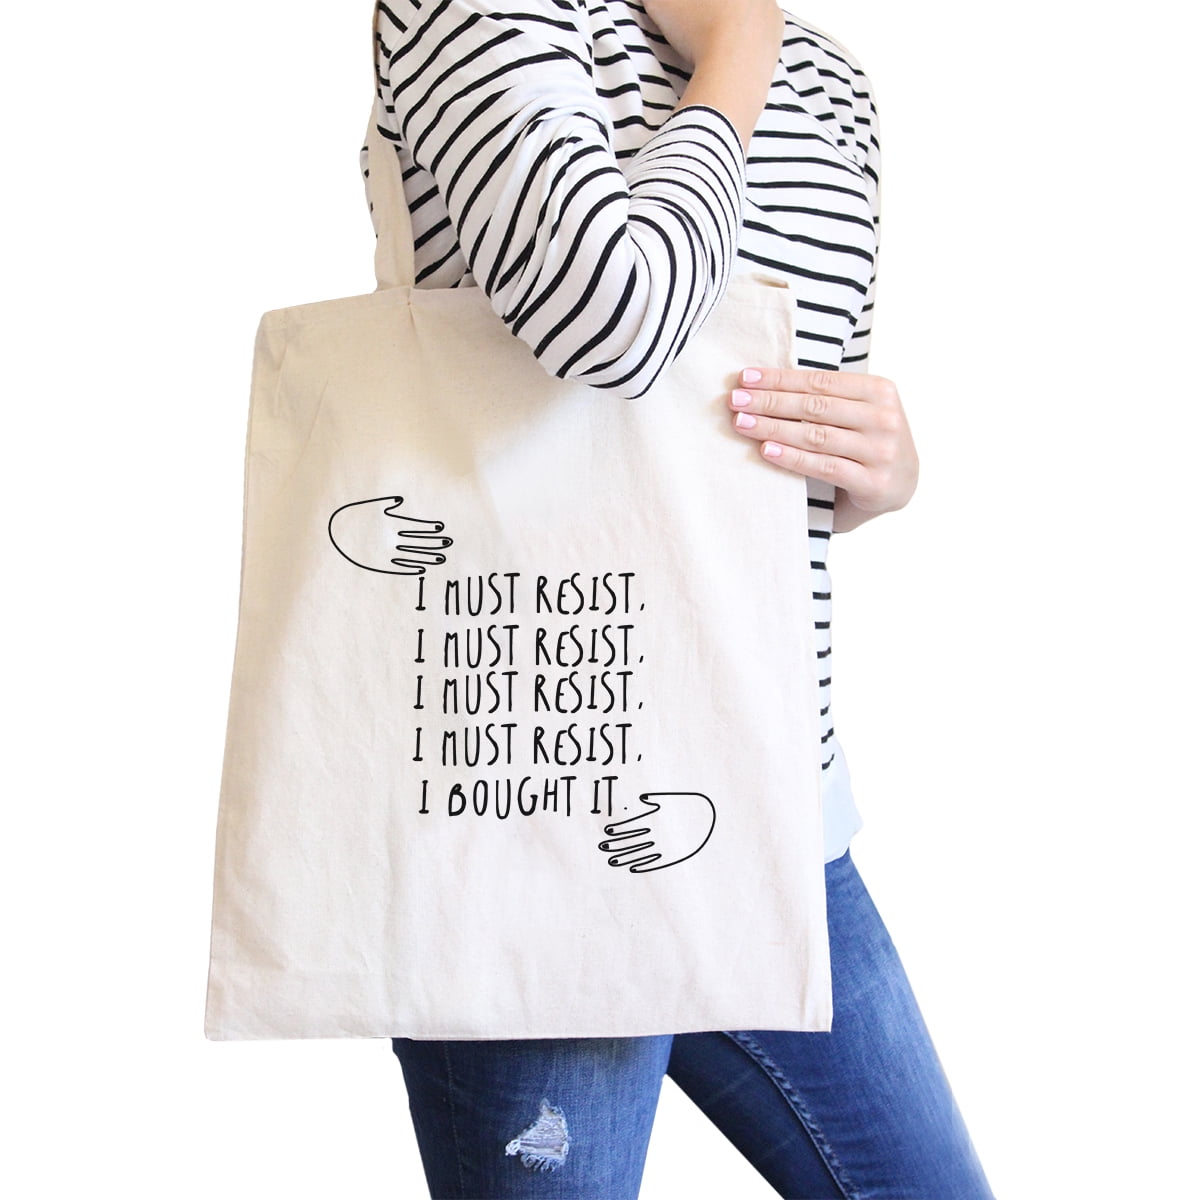 Canvas Tote Bags All You Need is Love Pub Reusable Shopping Funny Gift Bags